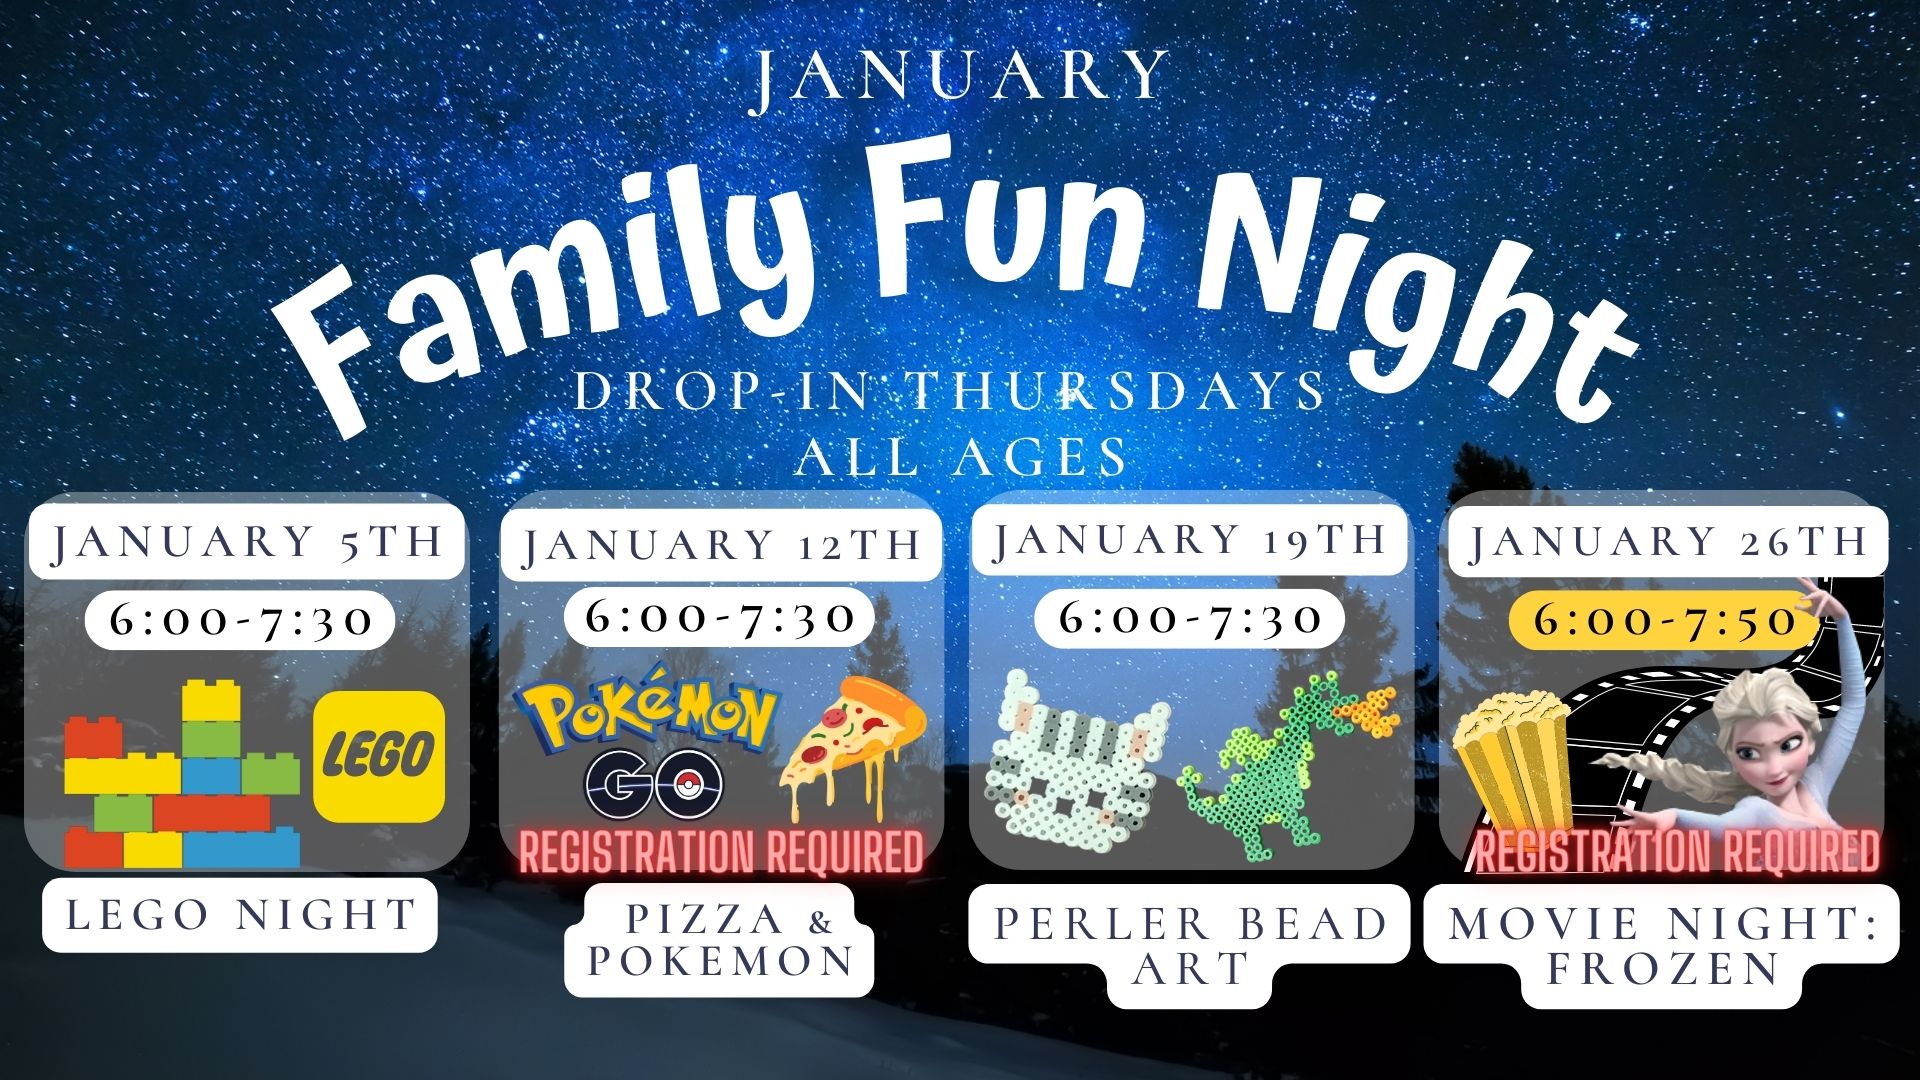 Text reads: January Family Fun Night Drop in Thursdays  All Ages.  January 5th 6:00 to 7:30 Lego Night.   January 12th 6:00 to 7:30 Pizza and Pokemon Registration Required.  January 19th 6:00 to 7:30 Perler Bead Art.  January 26th 6:00 to 7:50 Movie Night: Frozen.  Registration Required.  Text is on a stary night background with pictures of Lego, Pokemon and Pizza, a cat and dragon perler bead picture, along with movie popcorn and movie fil